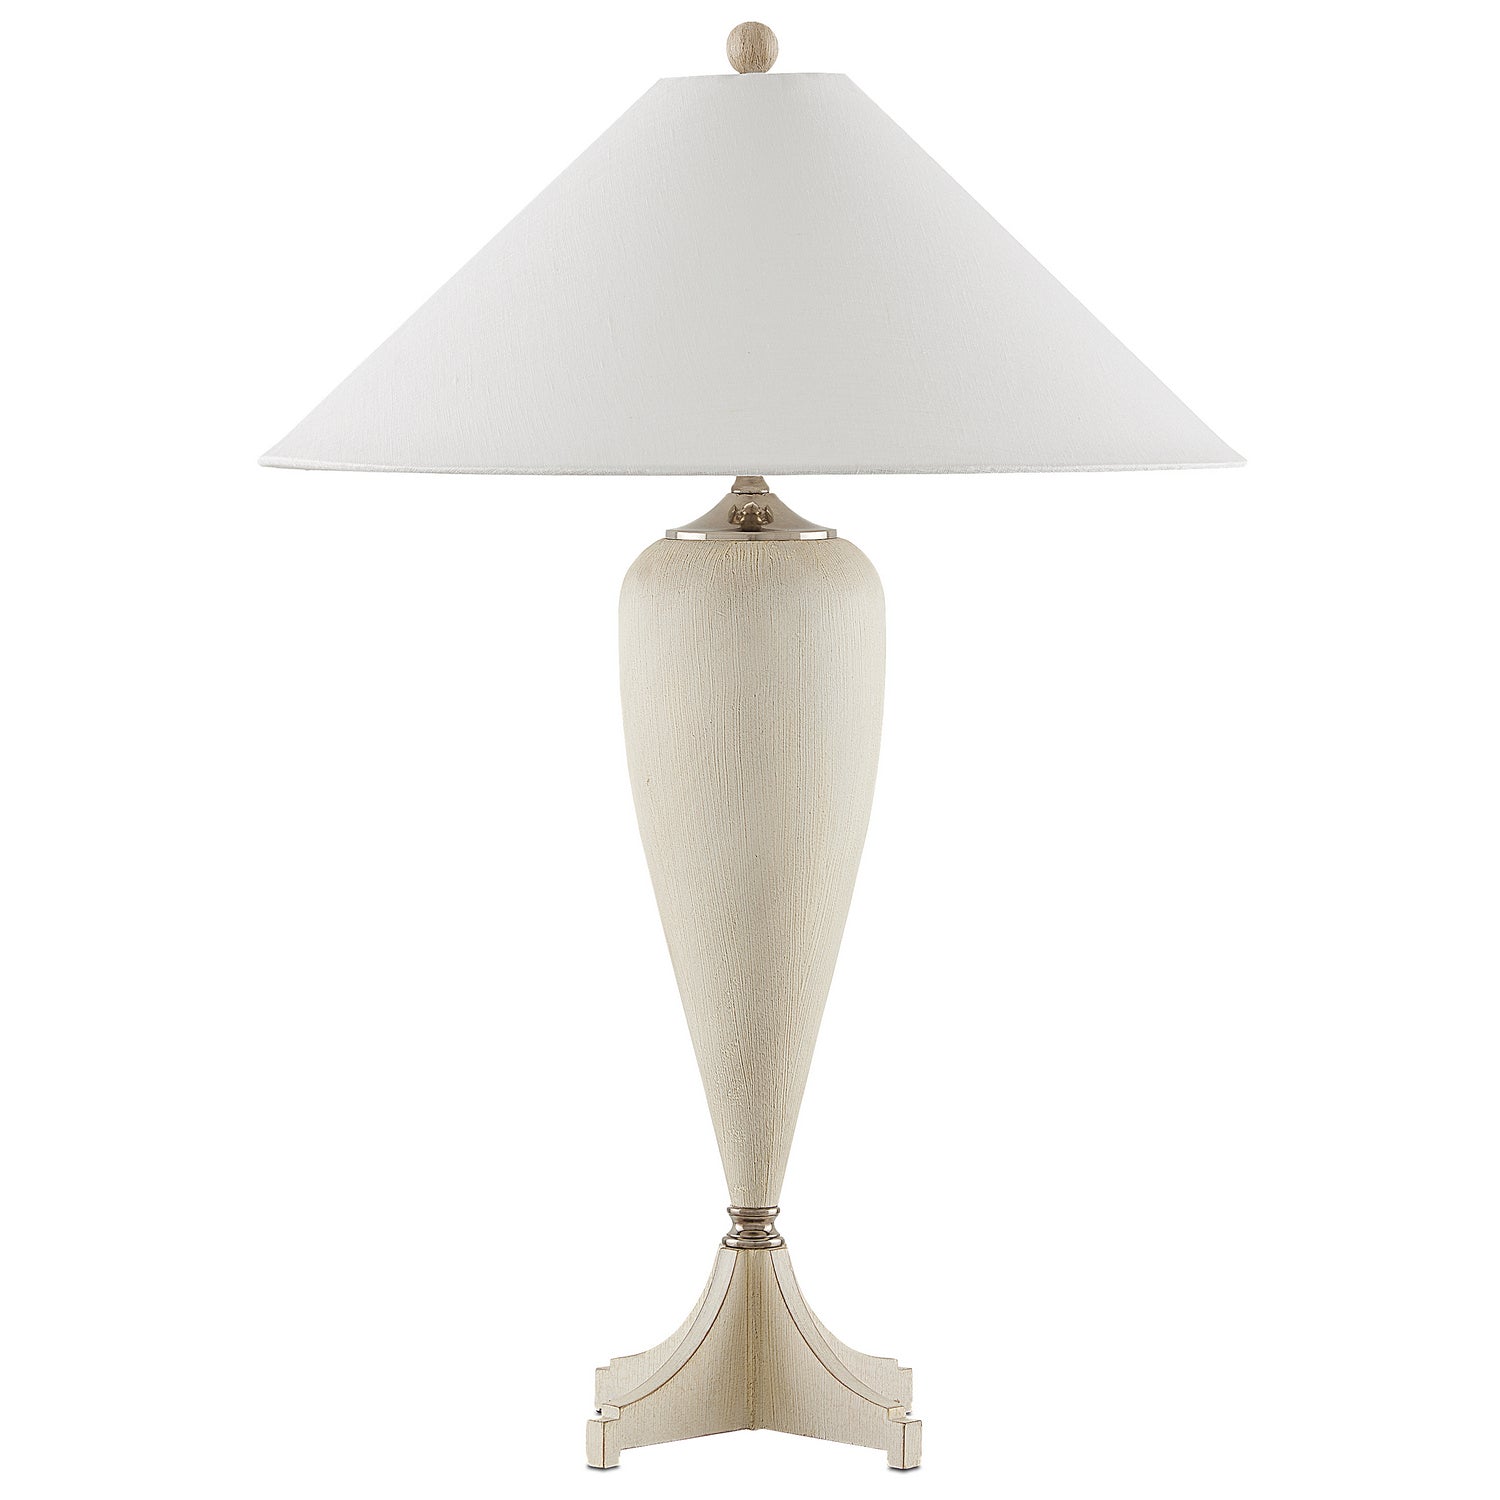 One Light Table Lamp from the Hastings collection in Whitewash/Polished Nickel finish